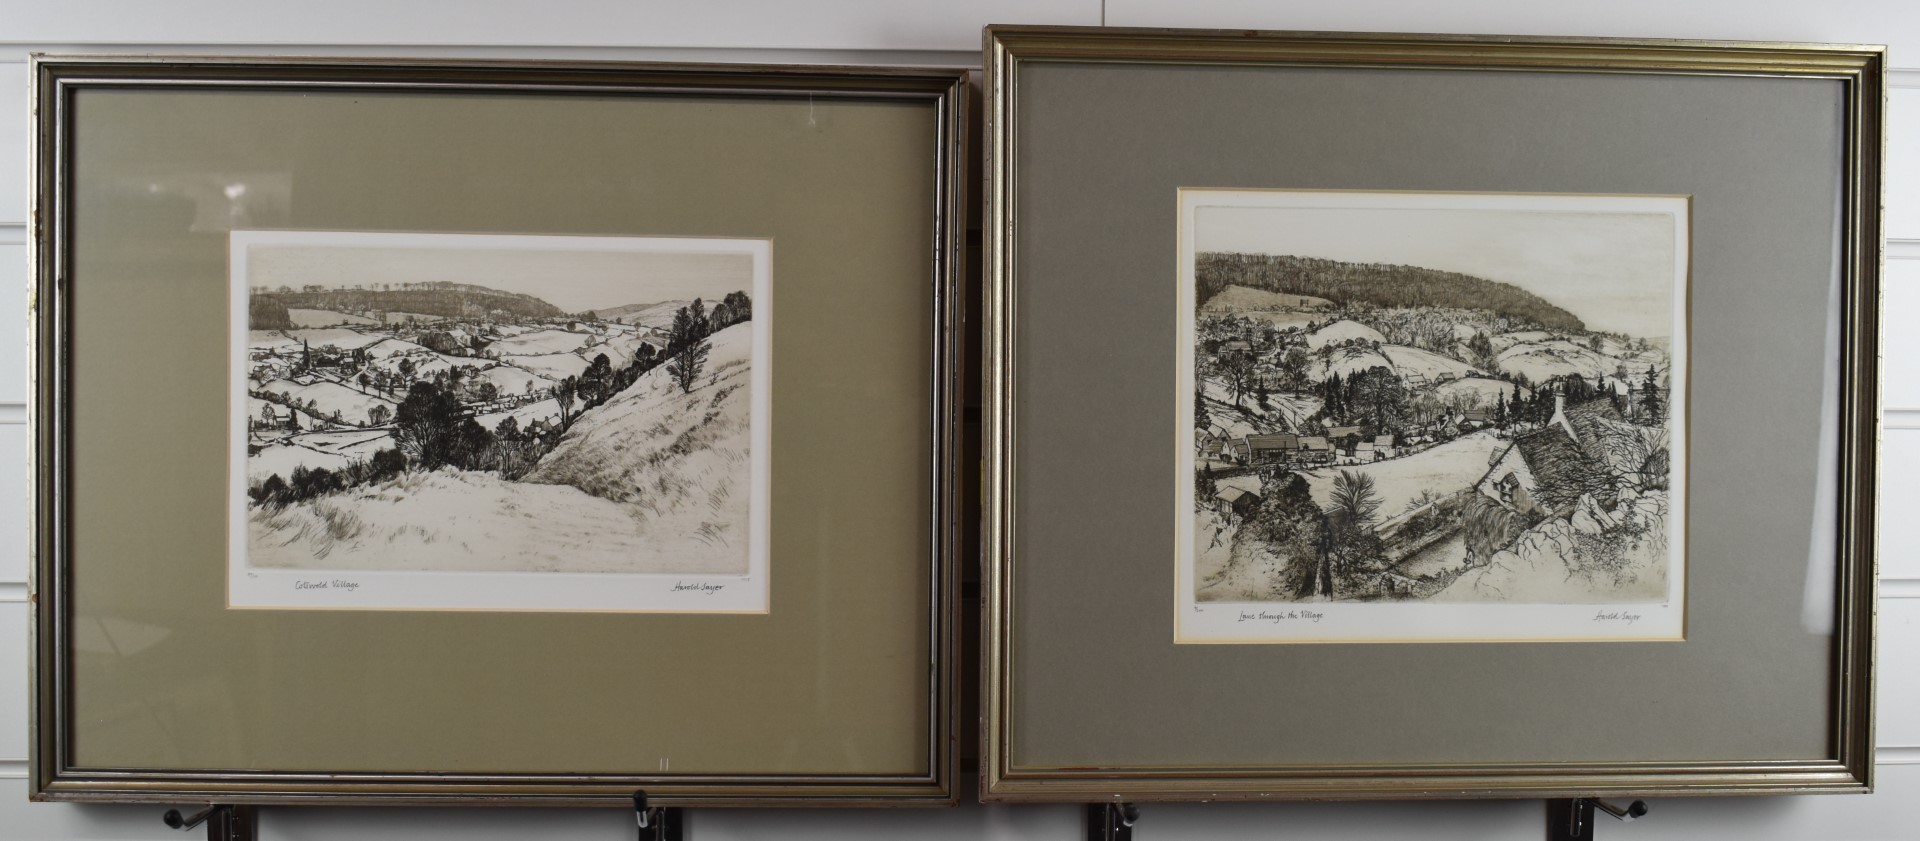 Harold Sayer pair of signed limited edition 89/100 and 6/200 etchings 'Lane Through The Village' and